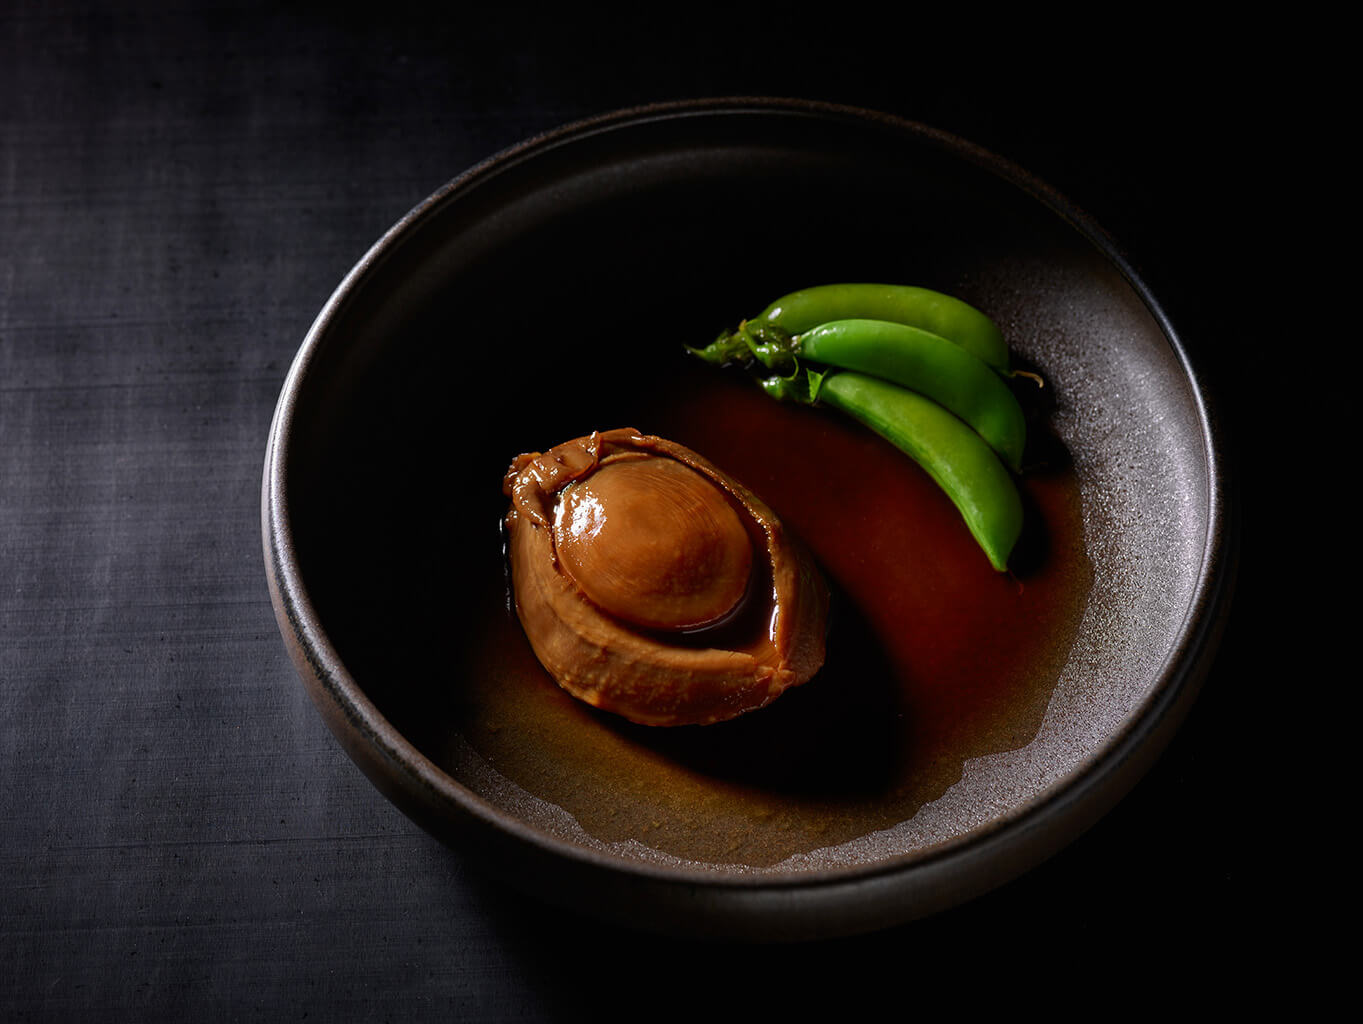 Braised abalone with steamed greens